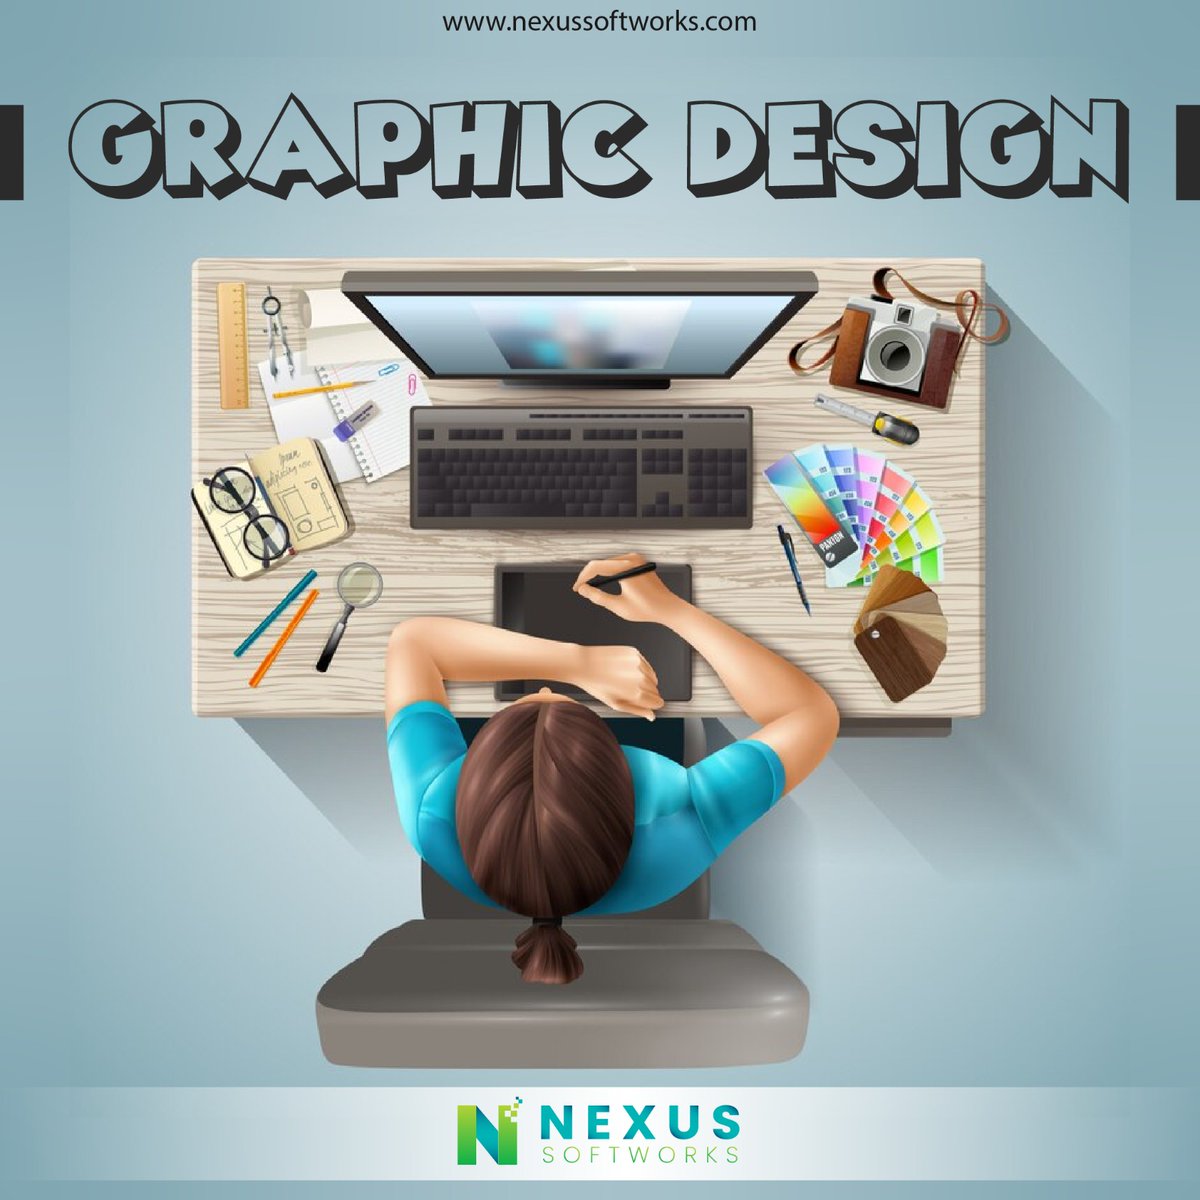 Unleashing Creativity: The Ultimate Guide to Mastering Graphic Design - Nexus Softworks.
.
.
#nexussoftworks #designing #graphicart #graphicdesign 🎨🎯